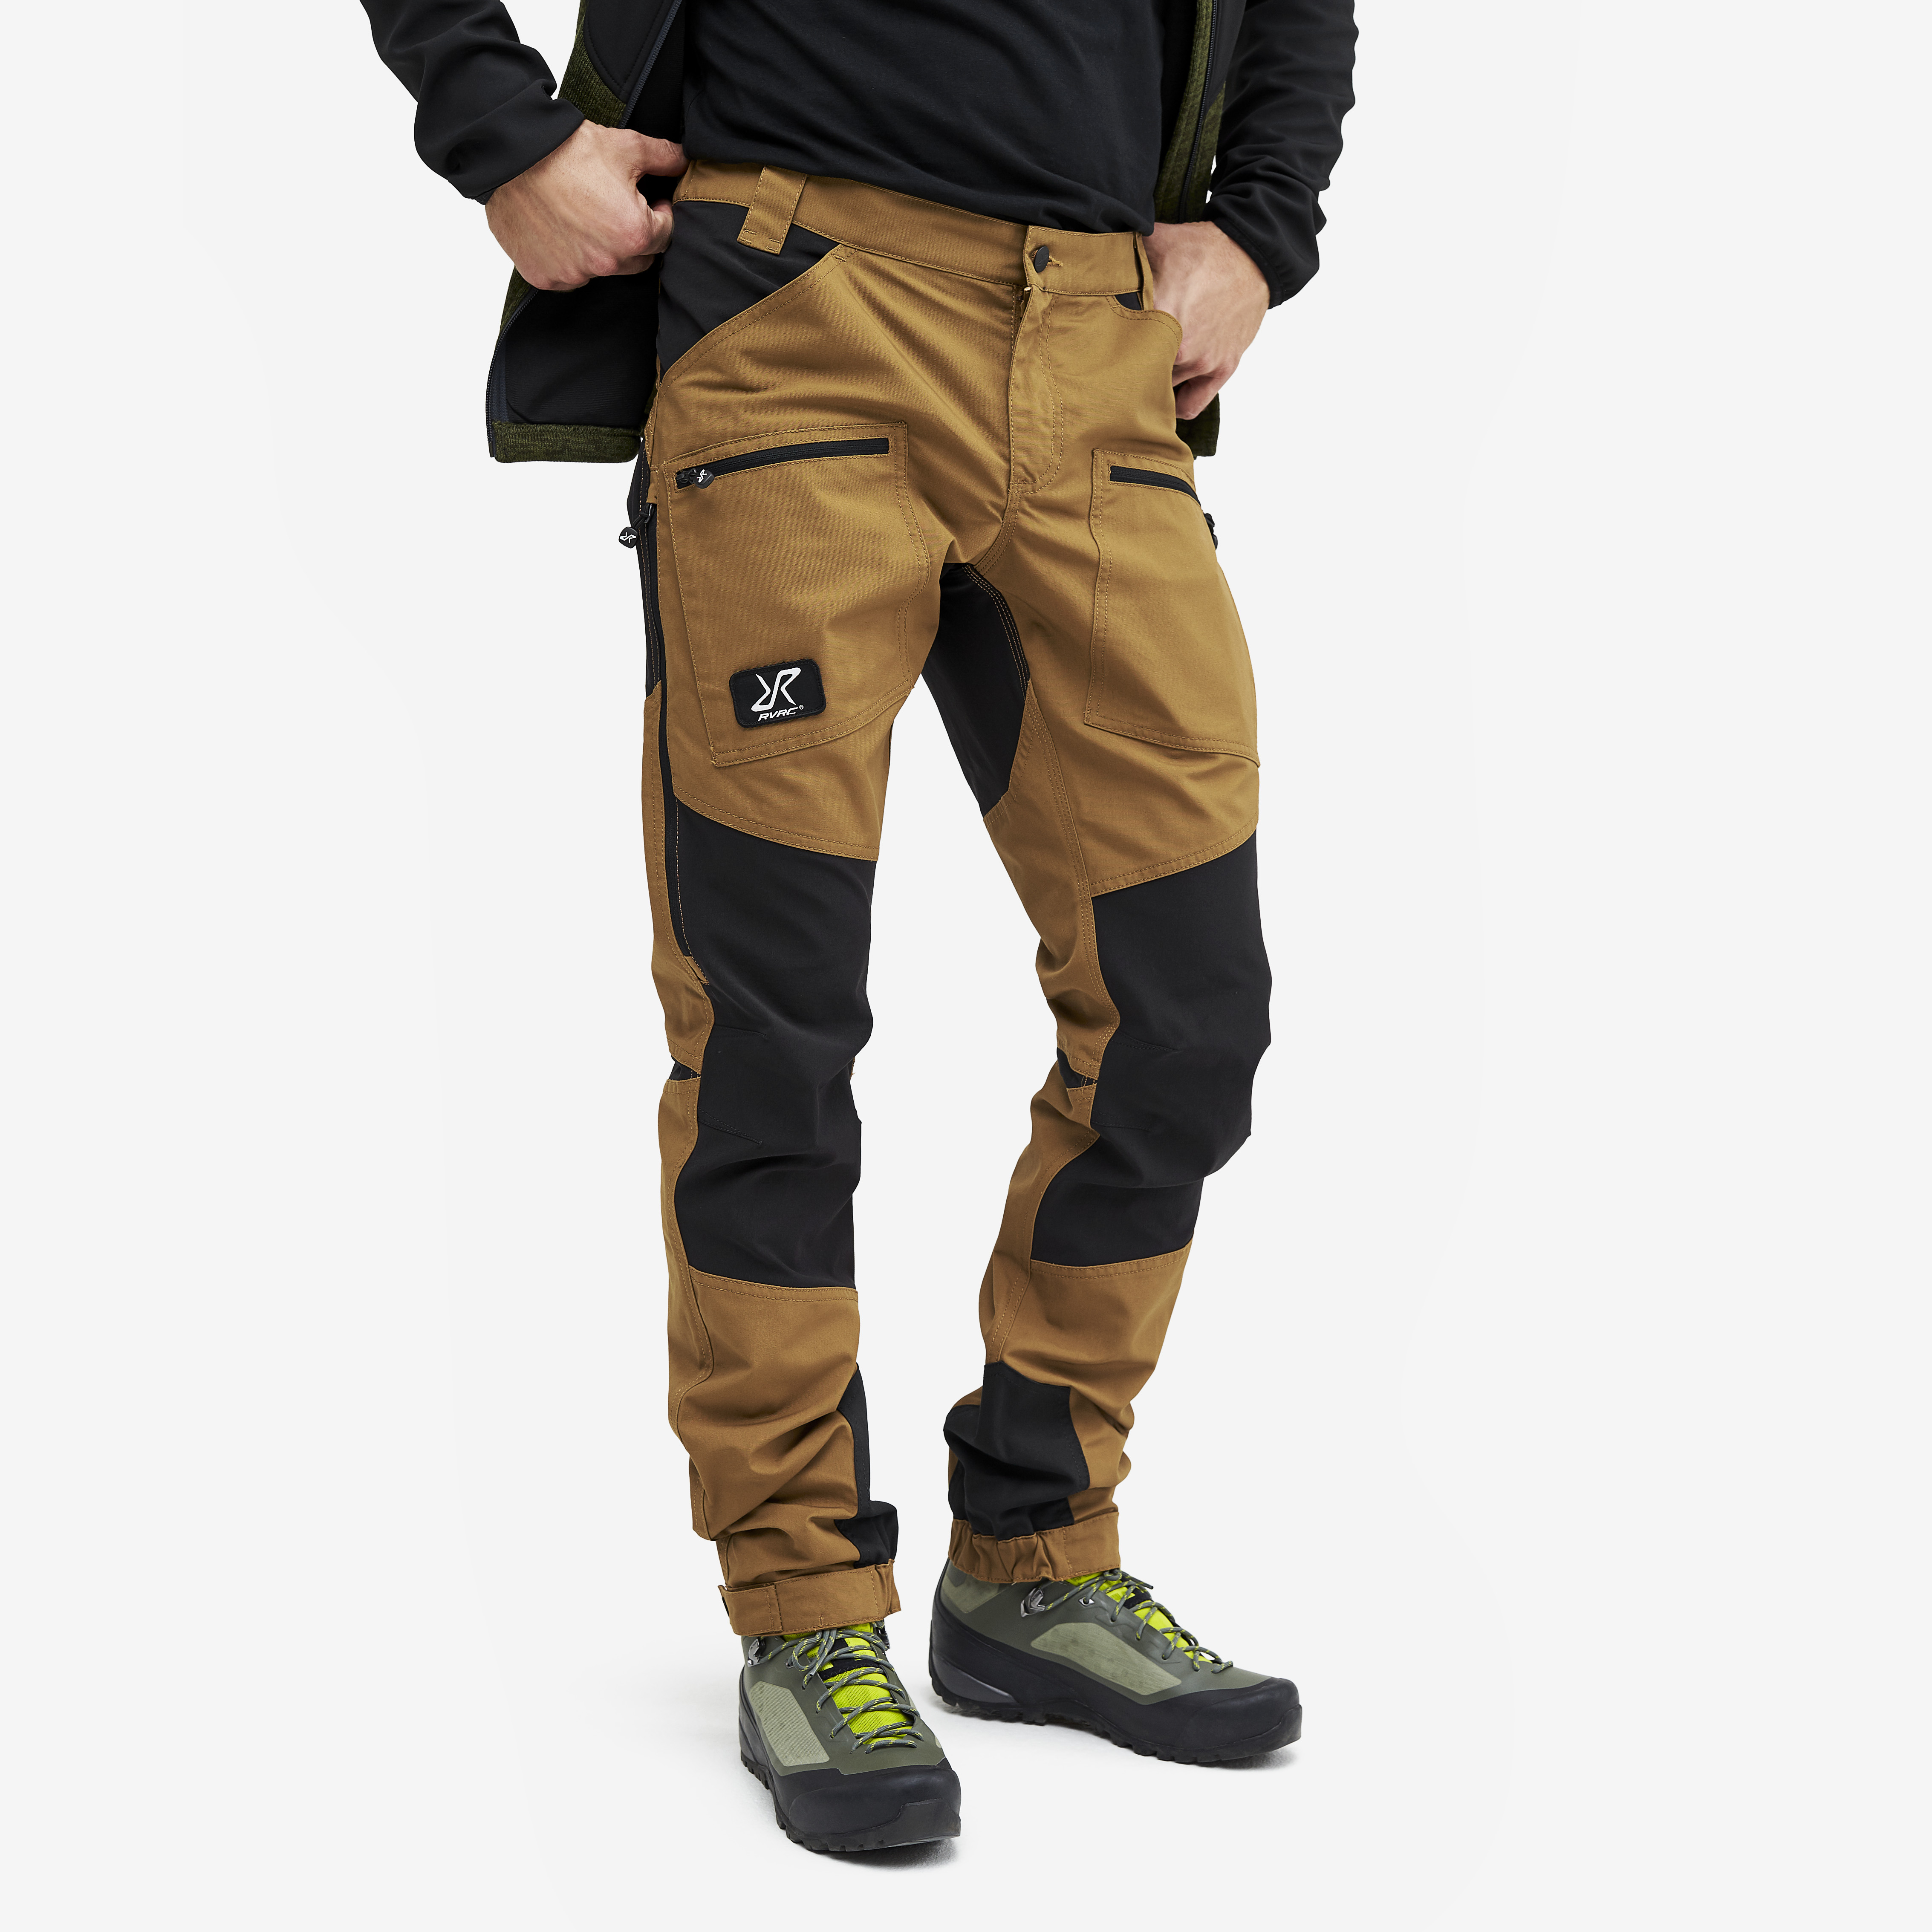 Nordwand Pro Pants Mustard Hombres